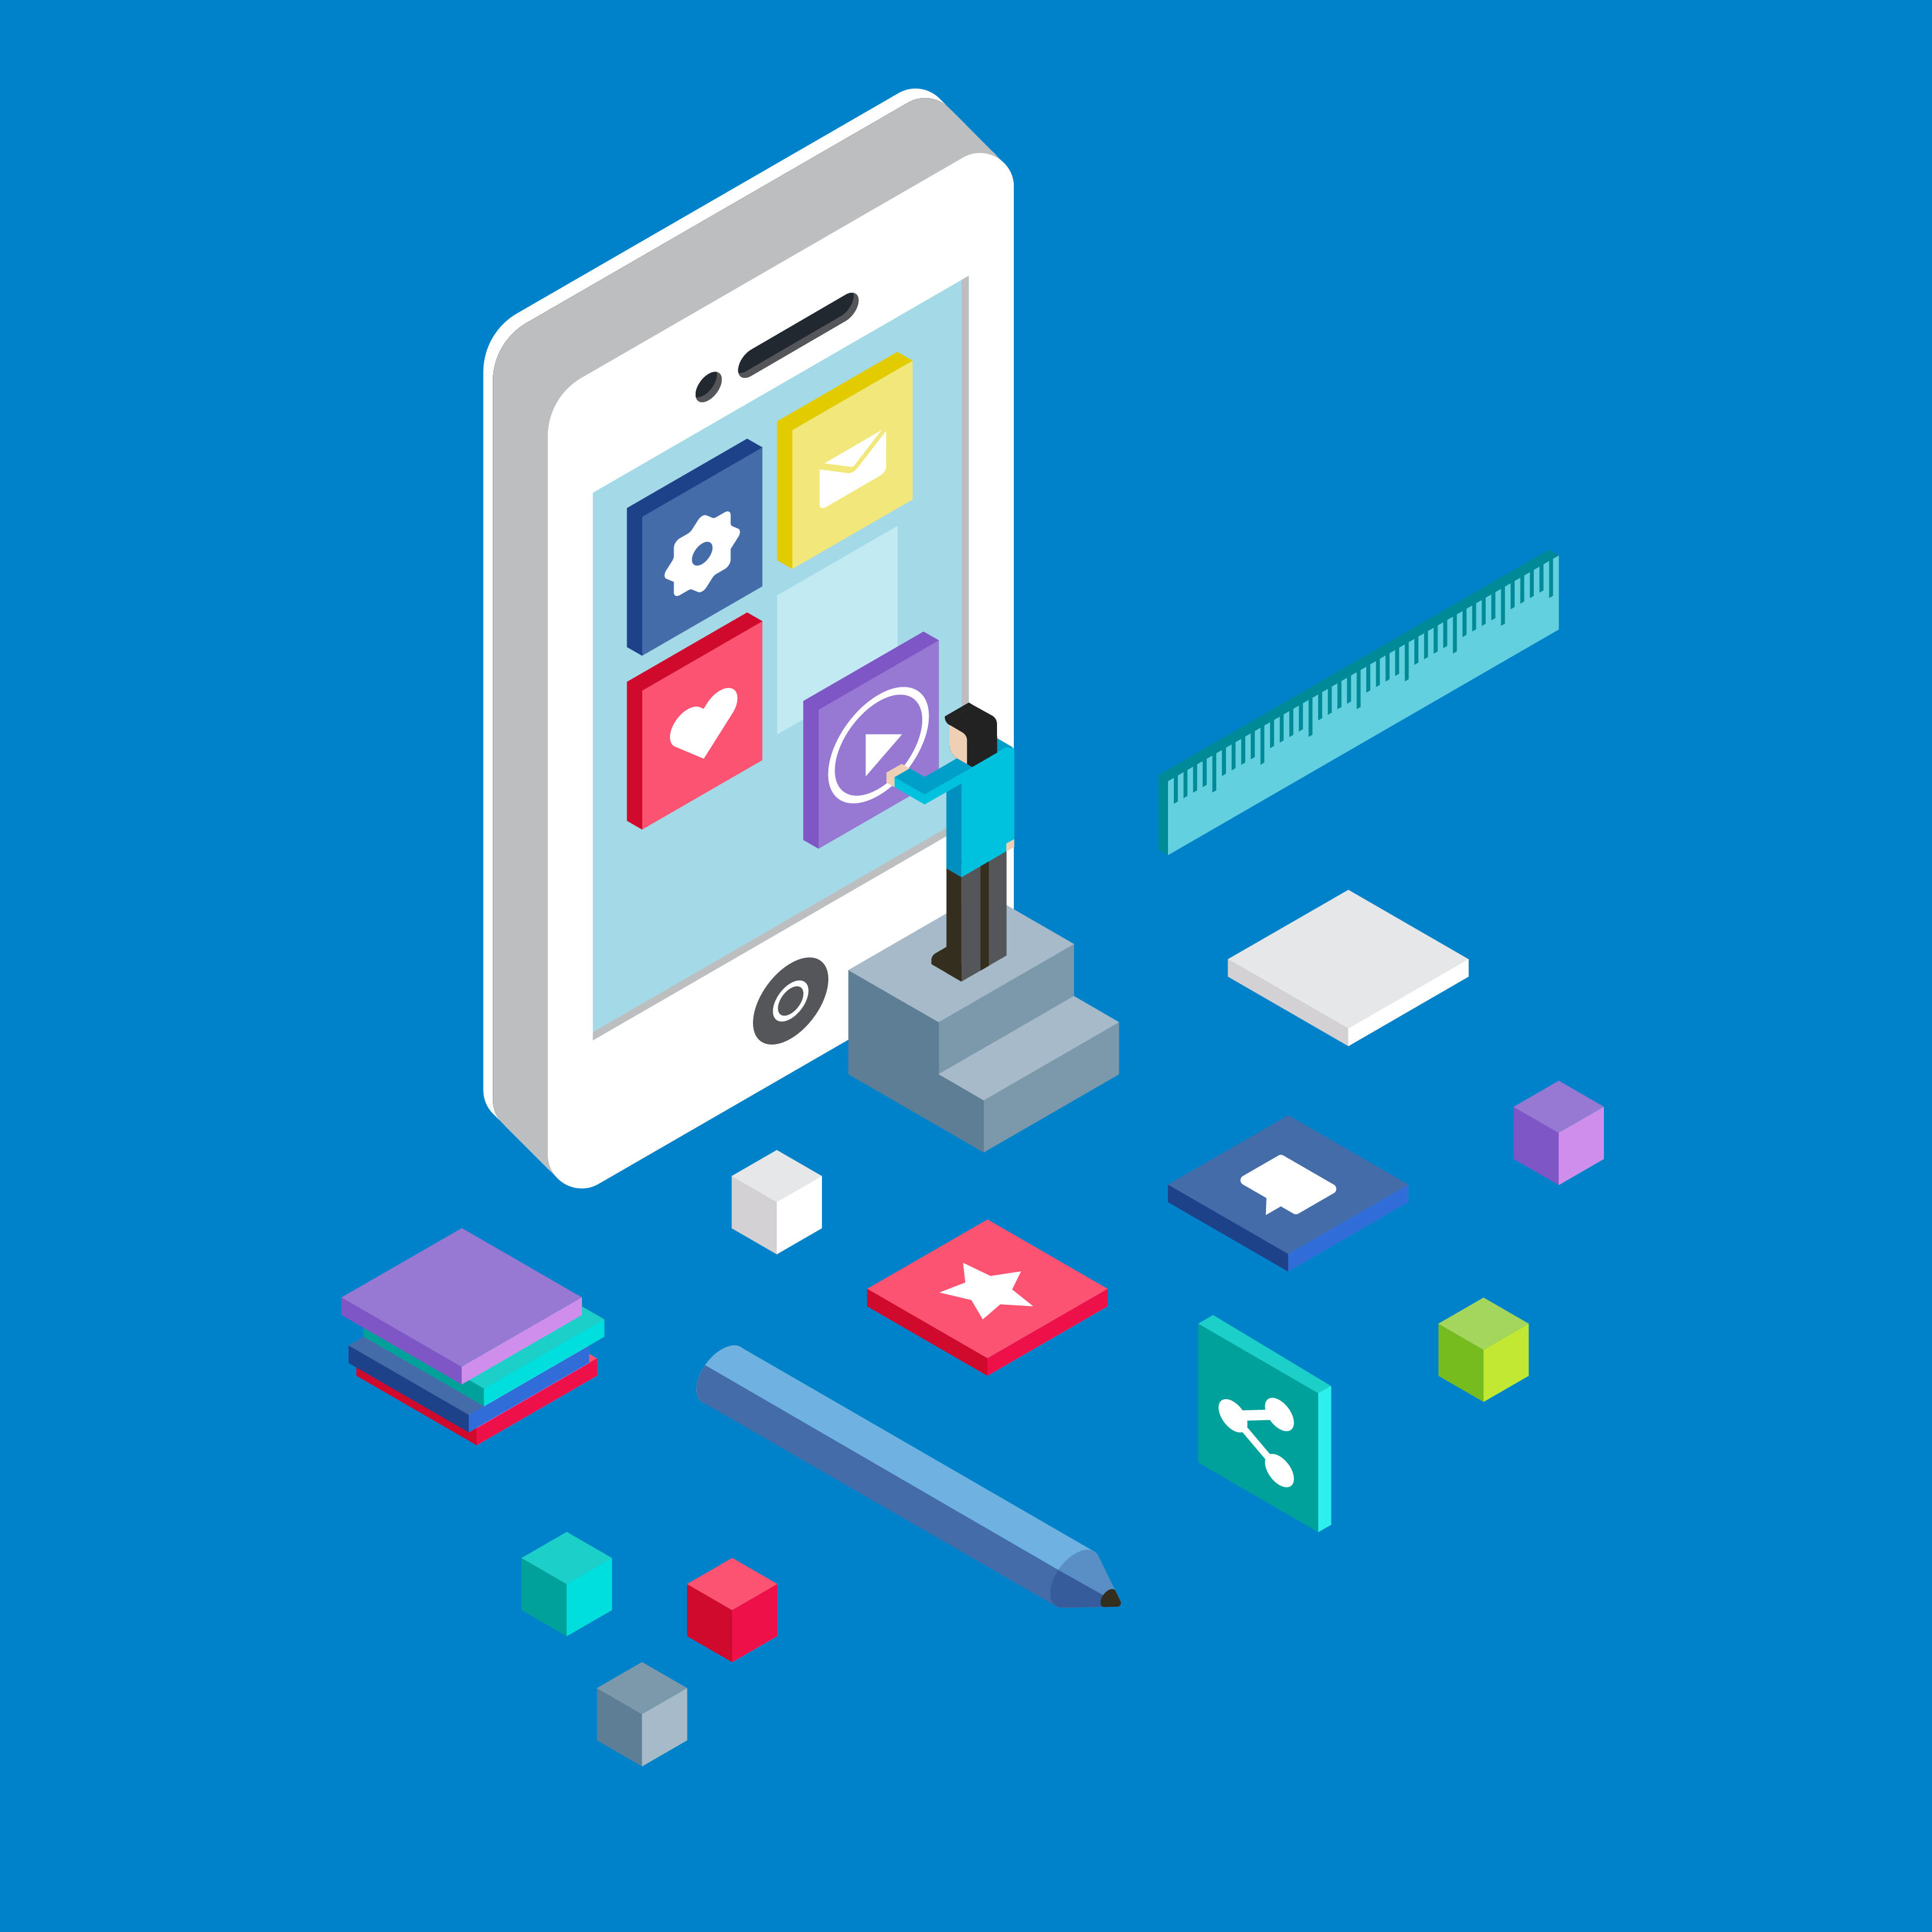 3 Questions to Ask When Starting on a Mobile App Project